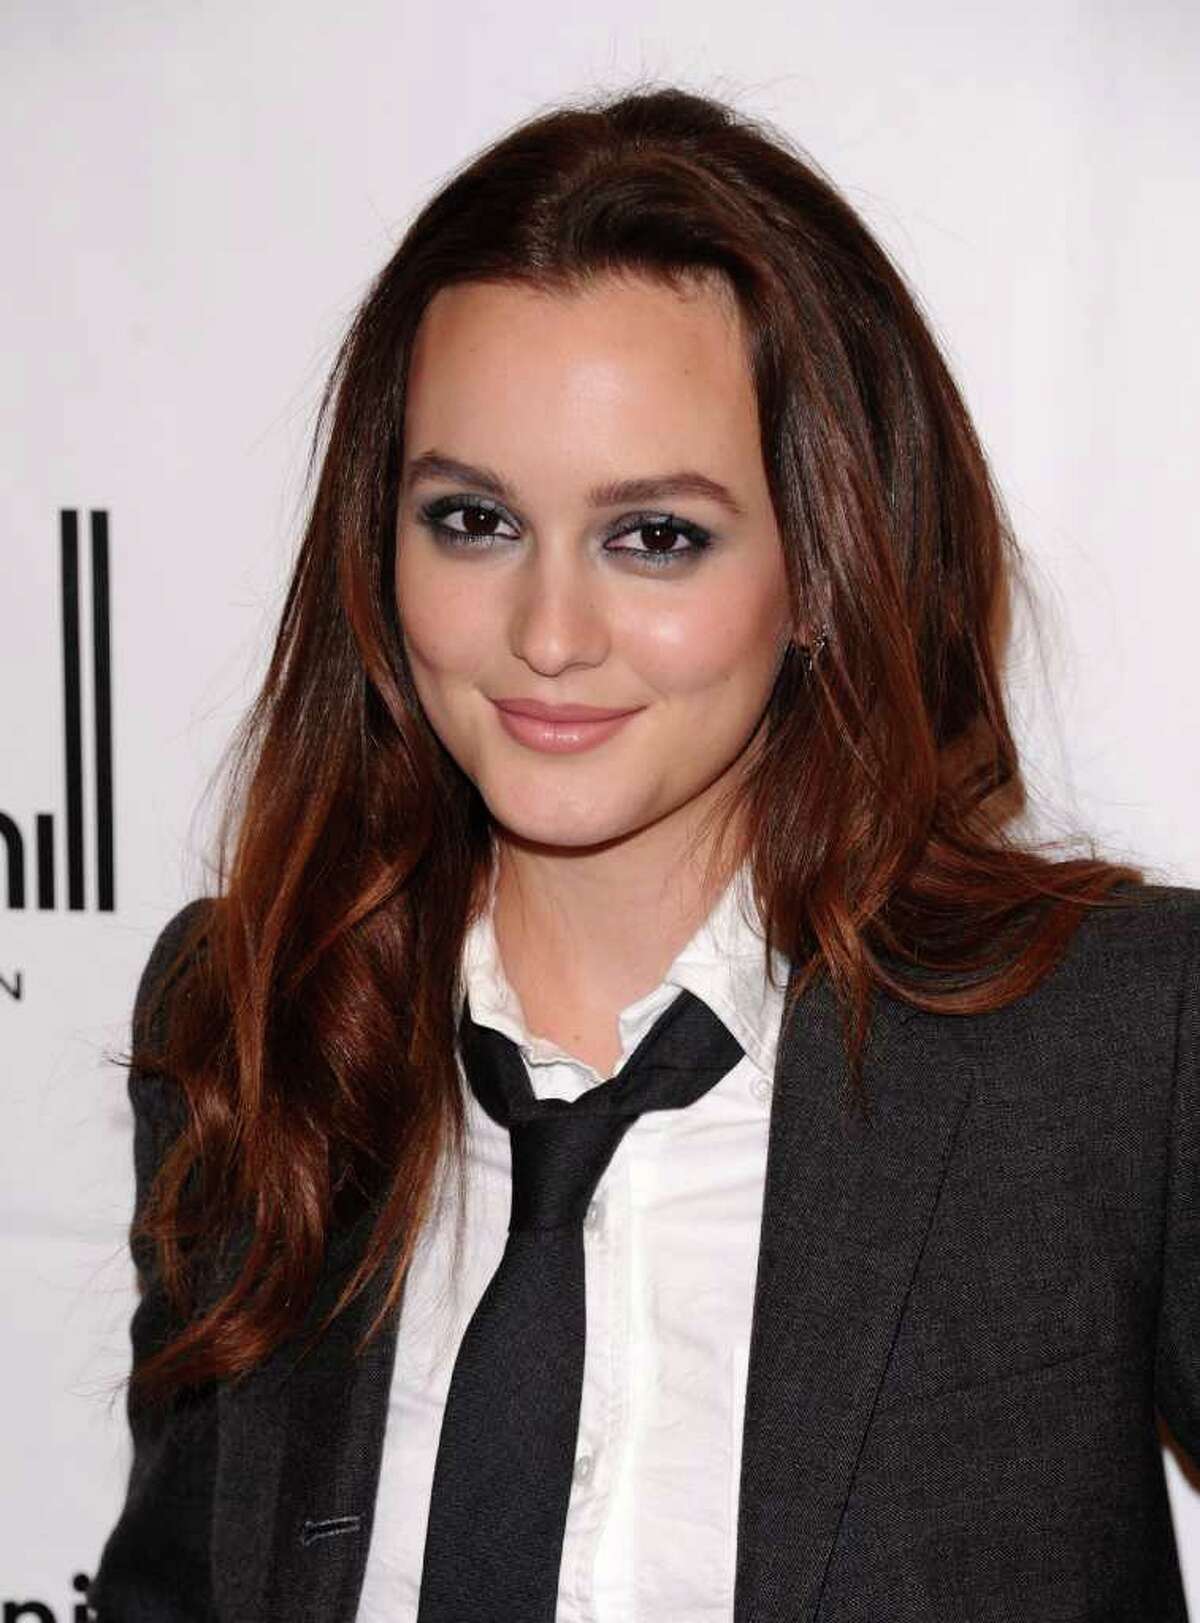 Actress Leighton Meester attends the 20th anniversary of The Gotham Independent Film awards in New York, on Monday, Nov. 29, 2010. (AP Photo/Peter Kramer)